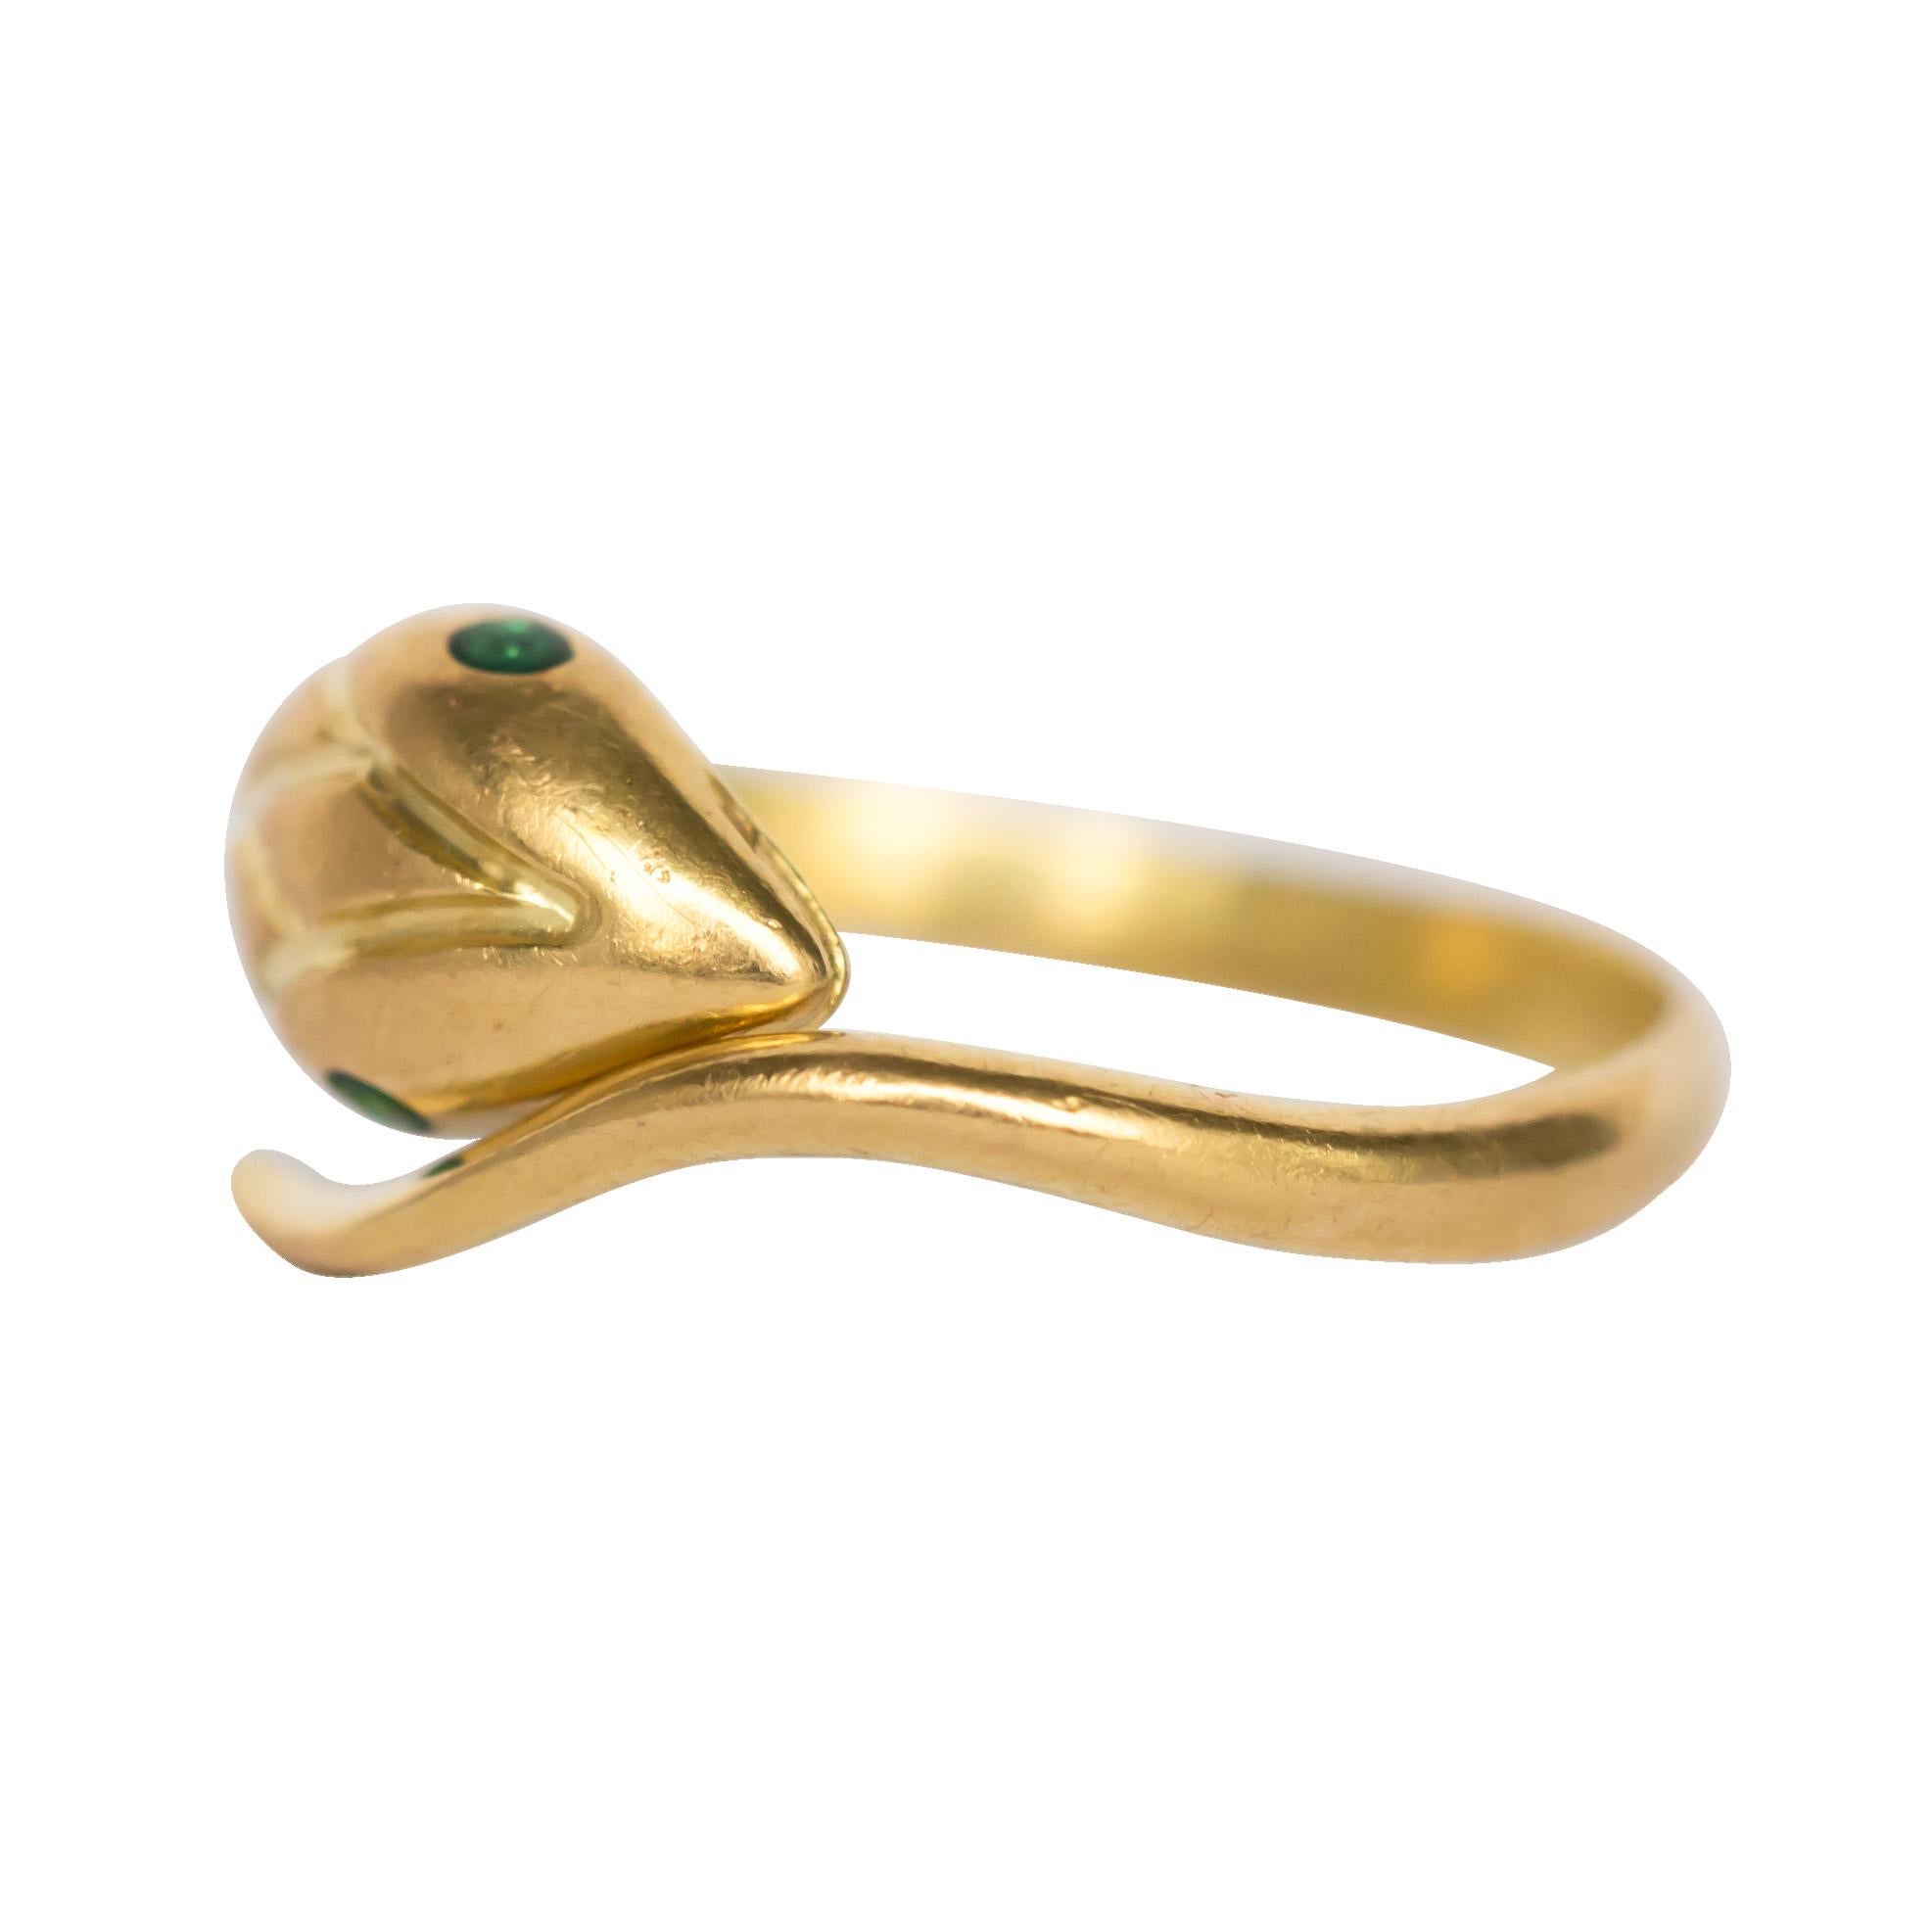 Ring Size: 9.5
Metal Type: 18 karat Yellow Gold 
Weight: 3.7 grams

Color Stone Details: 
Type: Emerald 
Shape: Round Brilliant 
Carat Weight: .04 carat, total weight.
Color: Natural Emerald 

Finger to Top of Stone Measurement: 3.03mm 